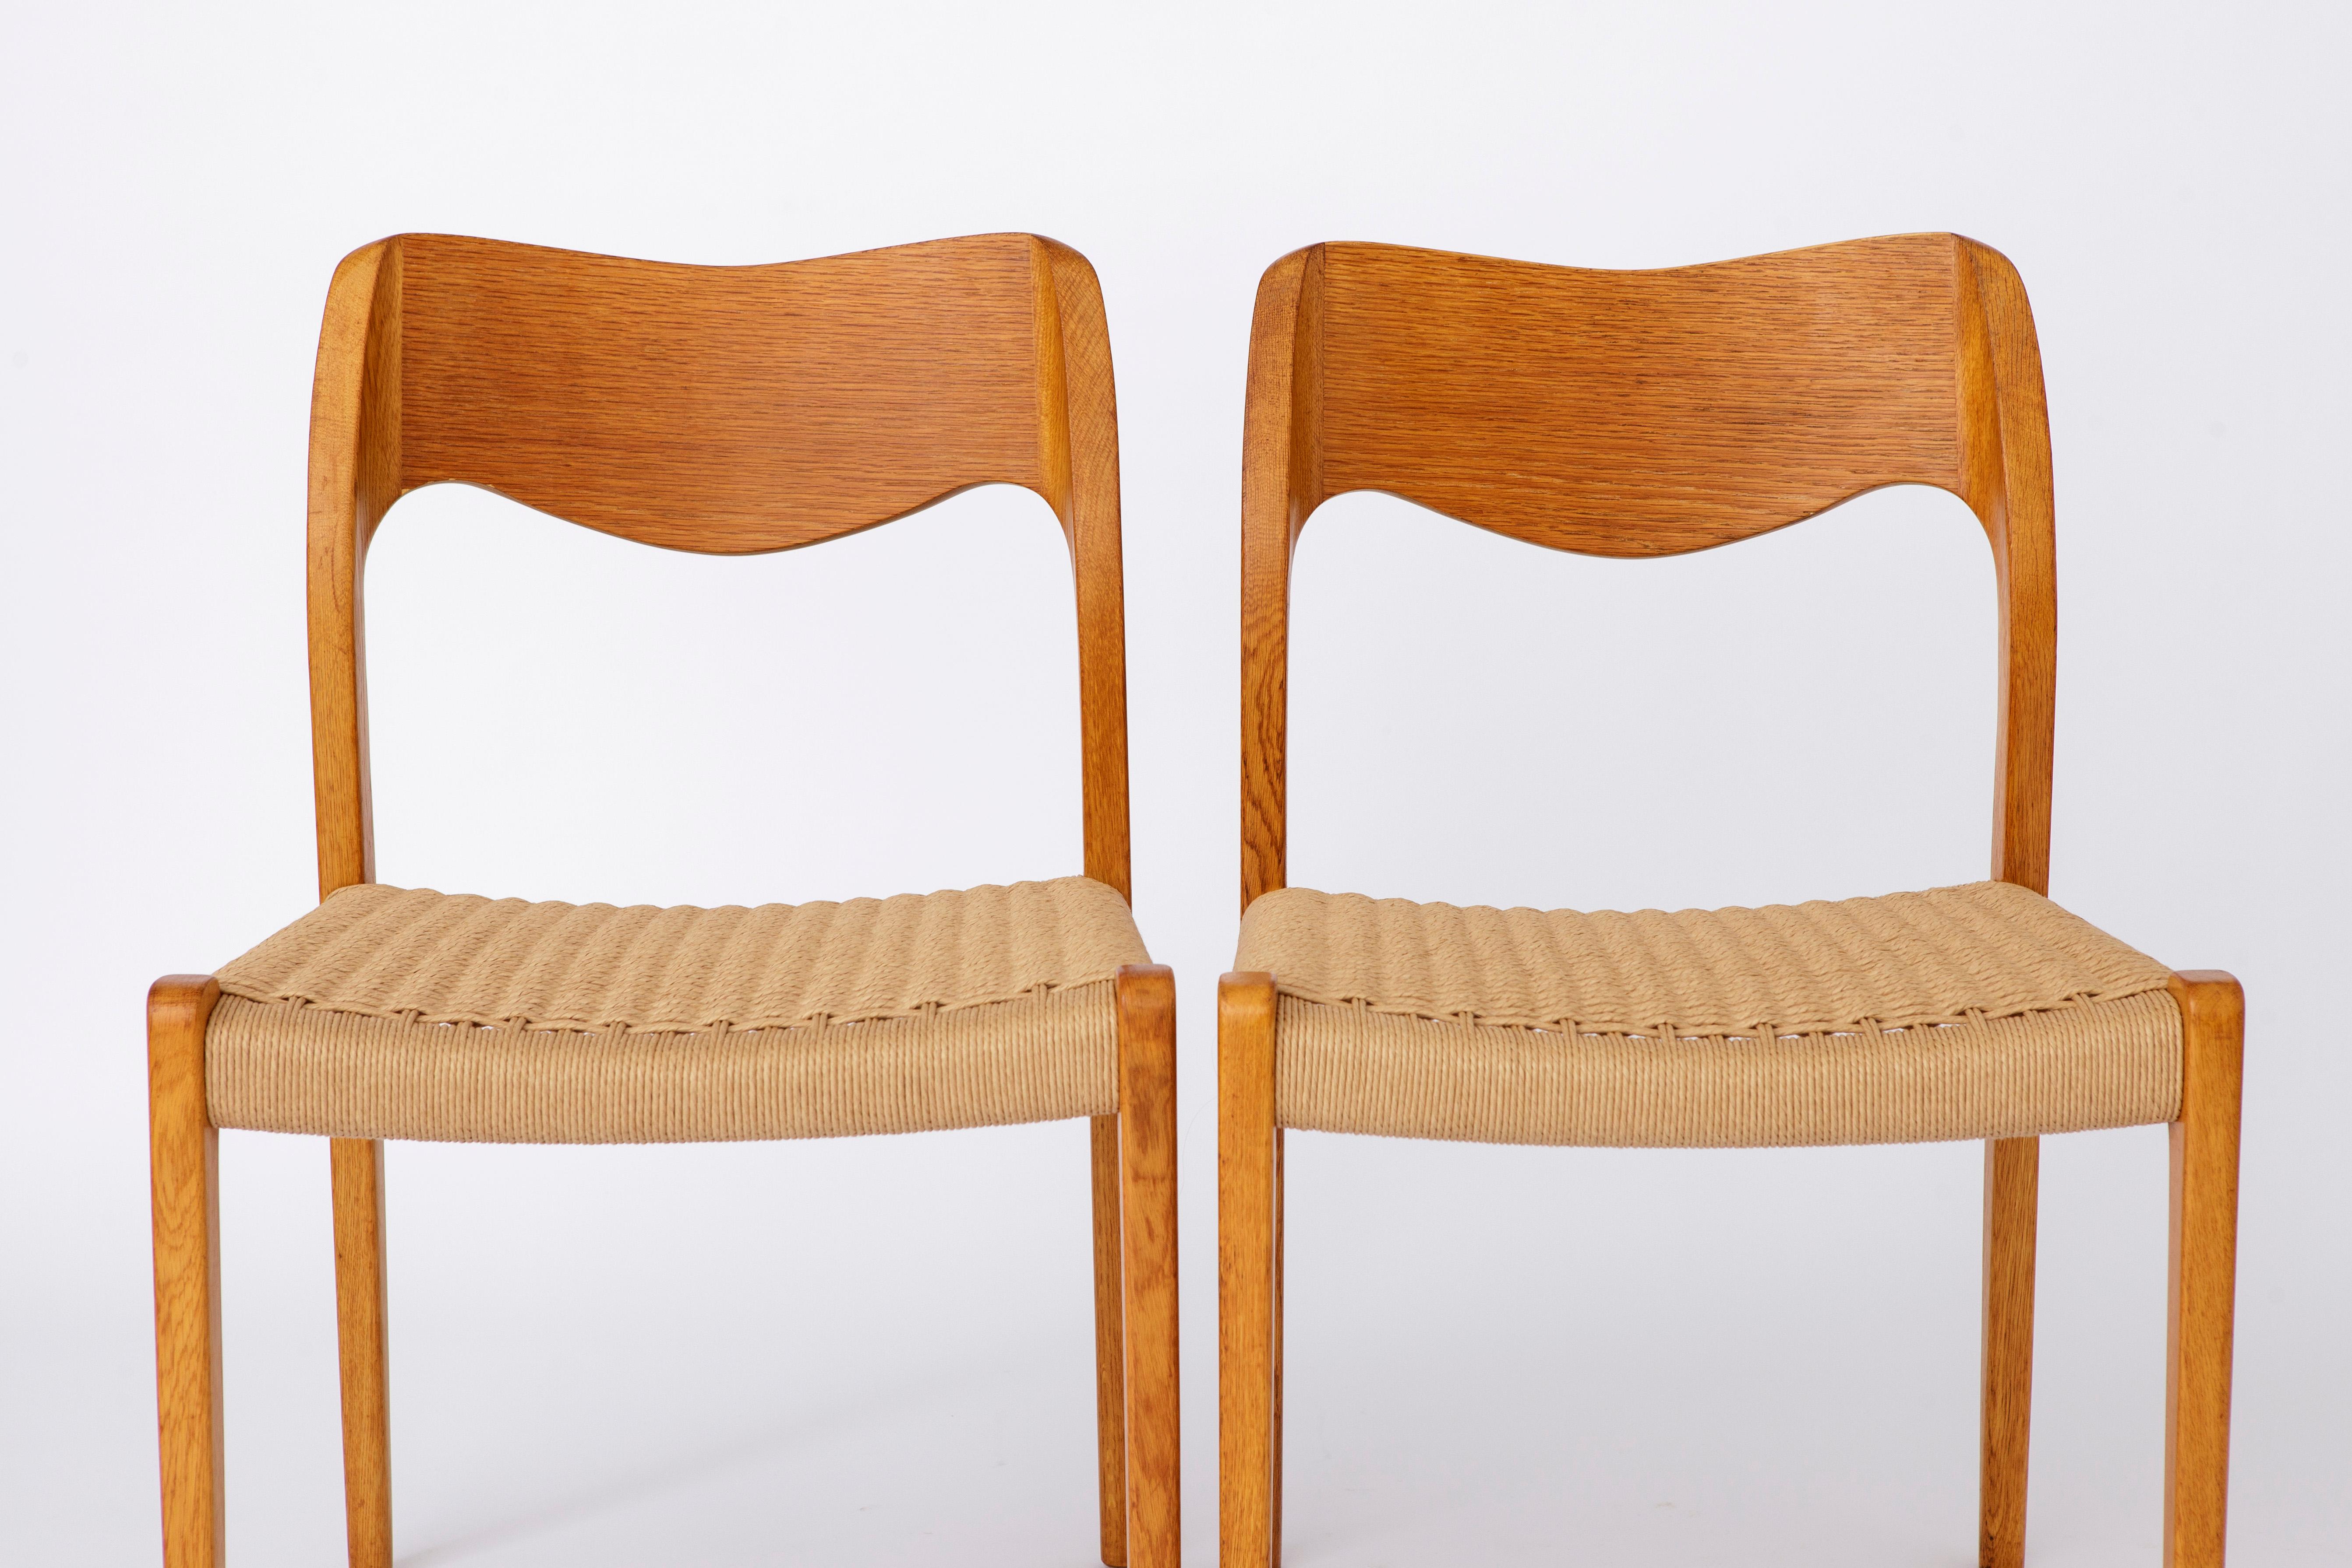 Niels Otto Moller chairs, model 71 in the version oak wood. 
Production period: 1950s. 
Displayed price is for 2 chairs. 

Good vintage condition. Small defects in the veneer. See last pictures. 
Hardly visible though.
Sturdy wooden frame. Stable